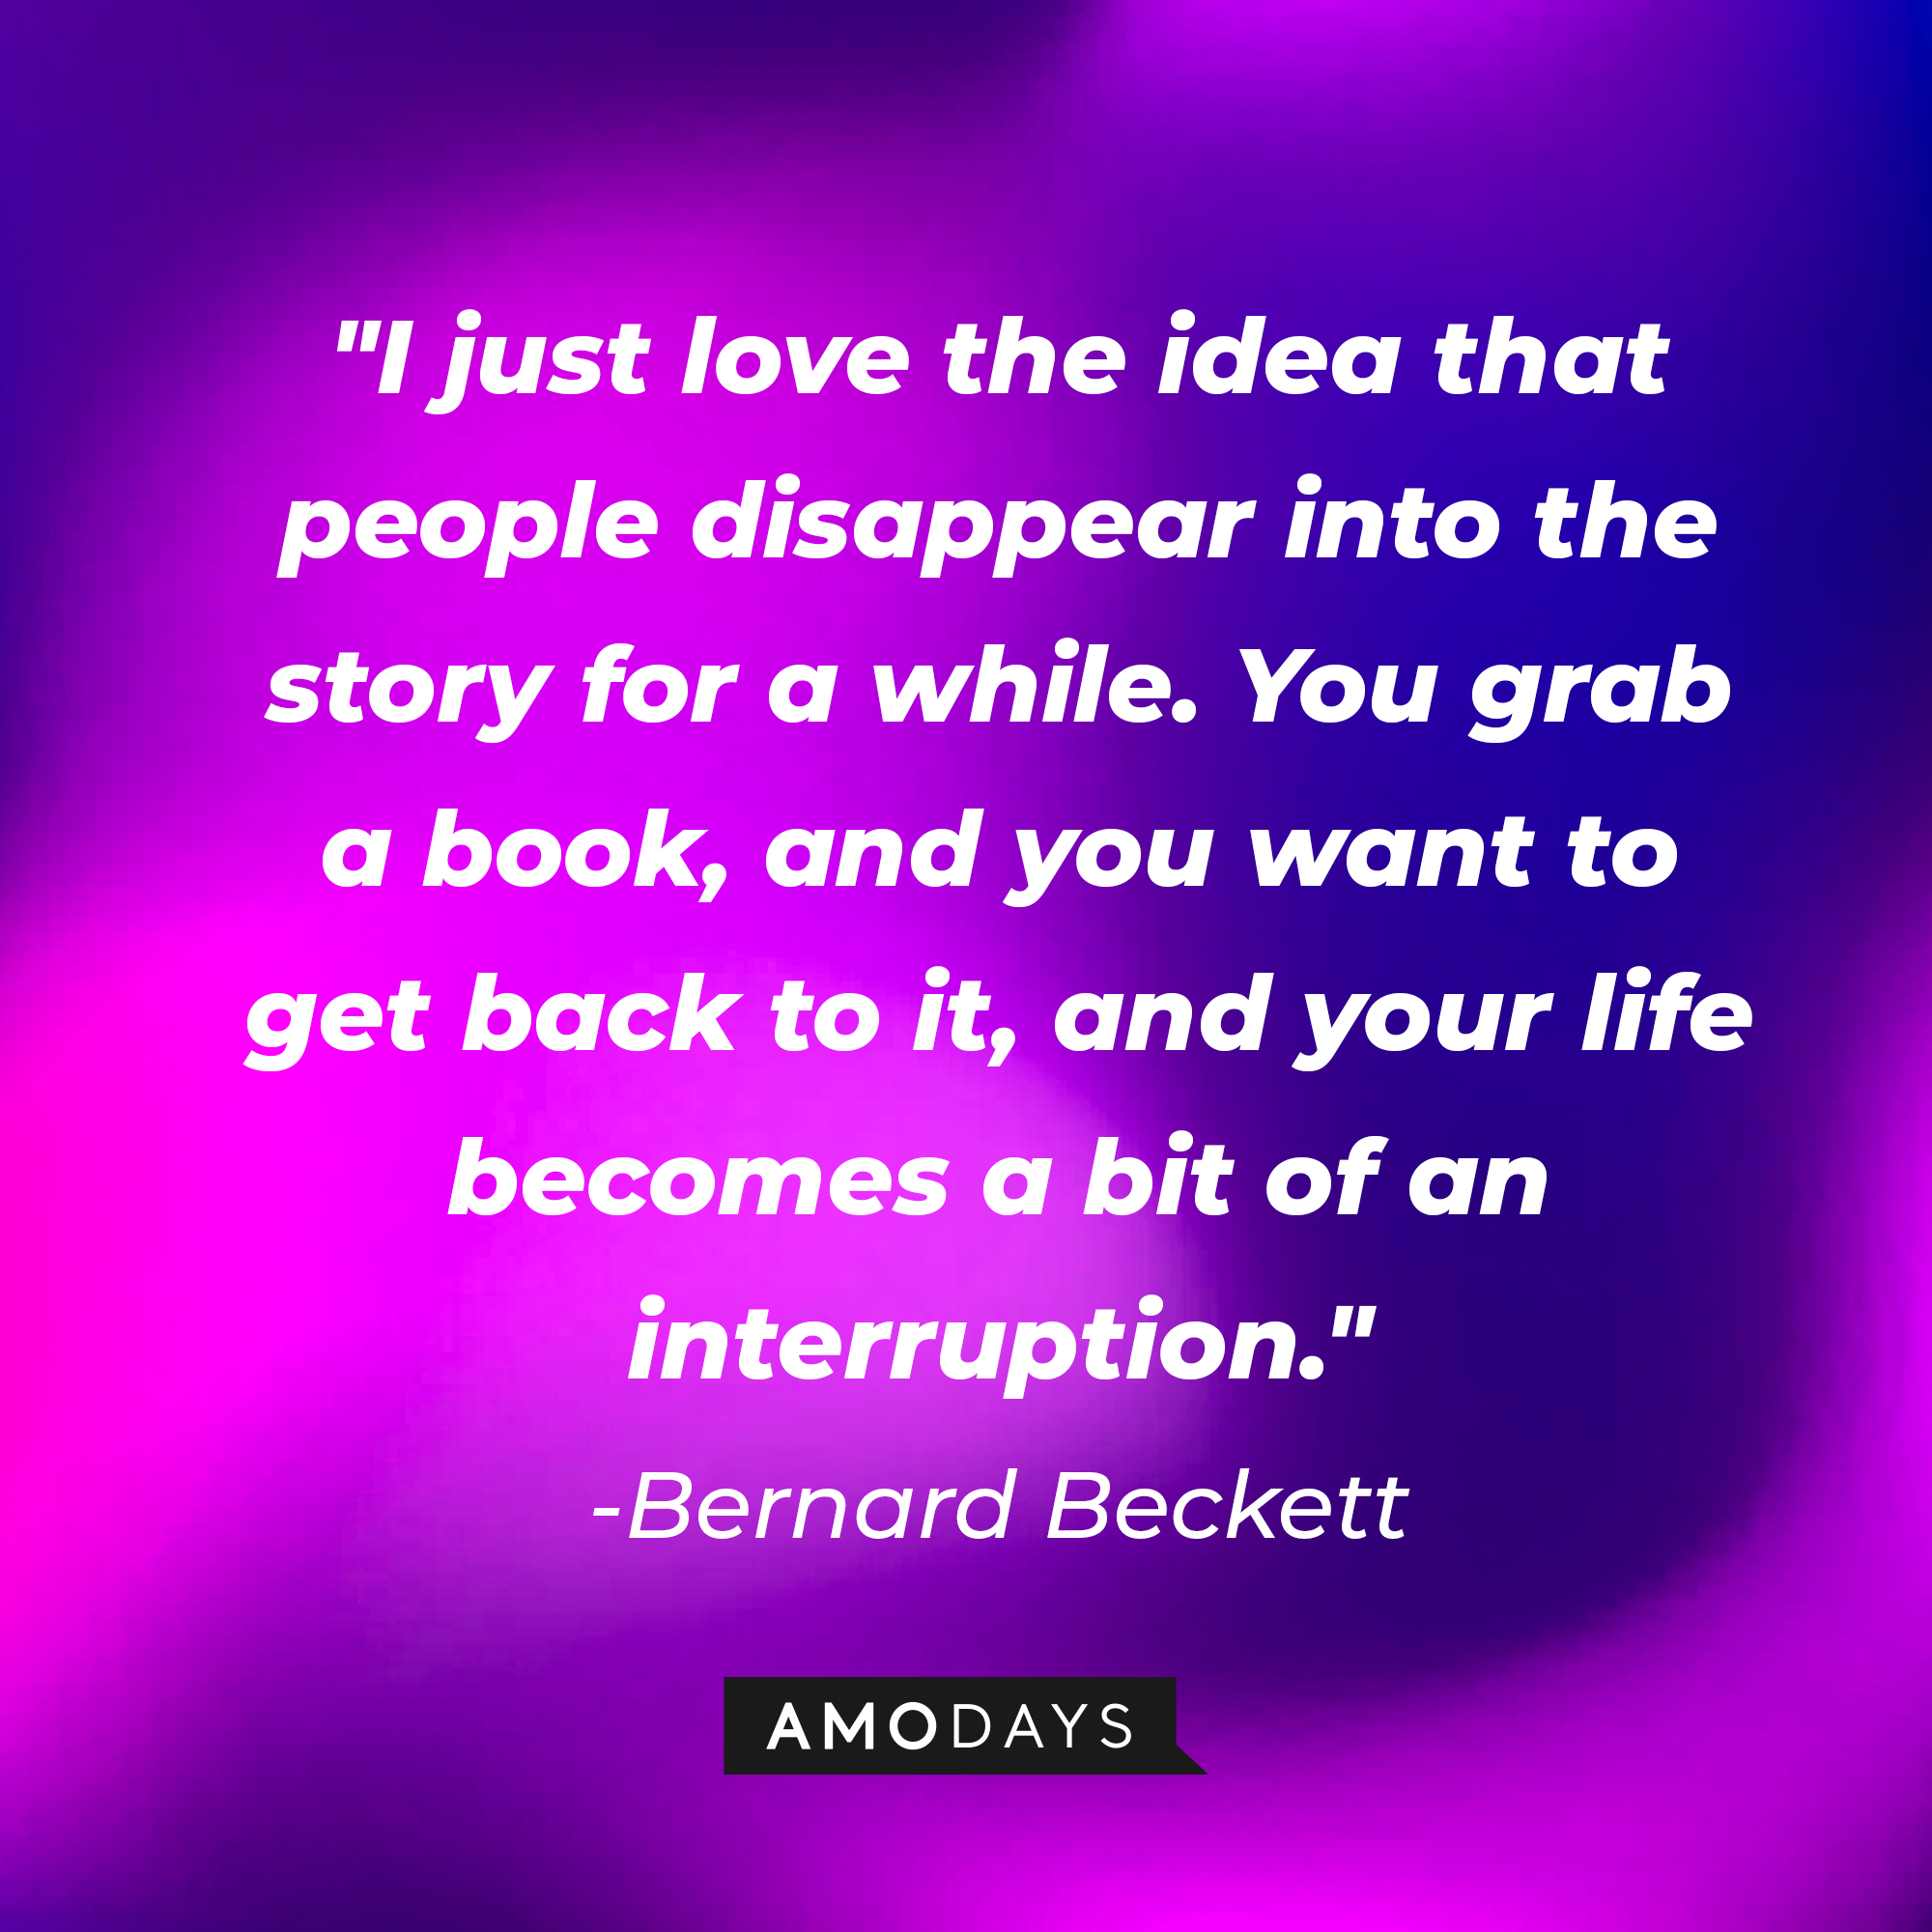 Bernard Beckett's quote: "I just love the idea that people disappear into the story for a while. You grab a book, and you want to get back to it, and your life becomes a bit of an interruption." | Image: AmoDays